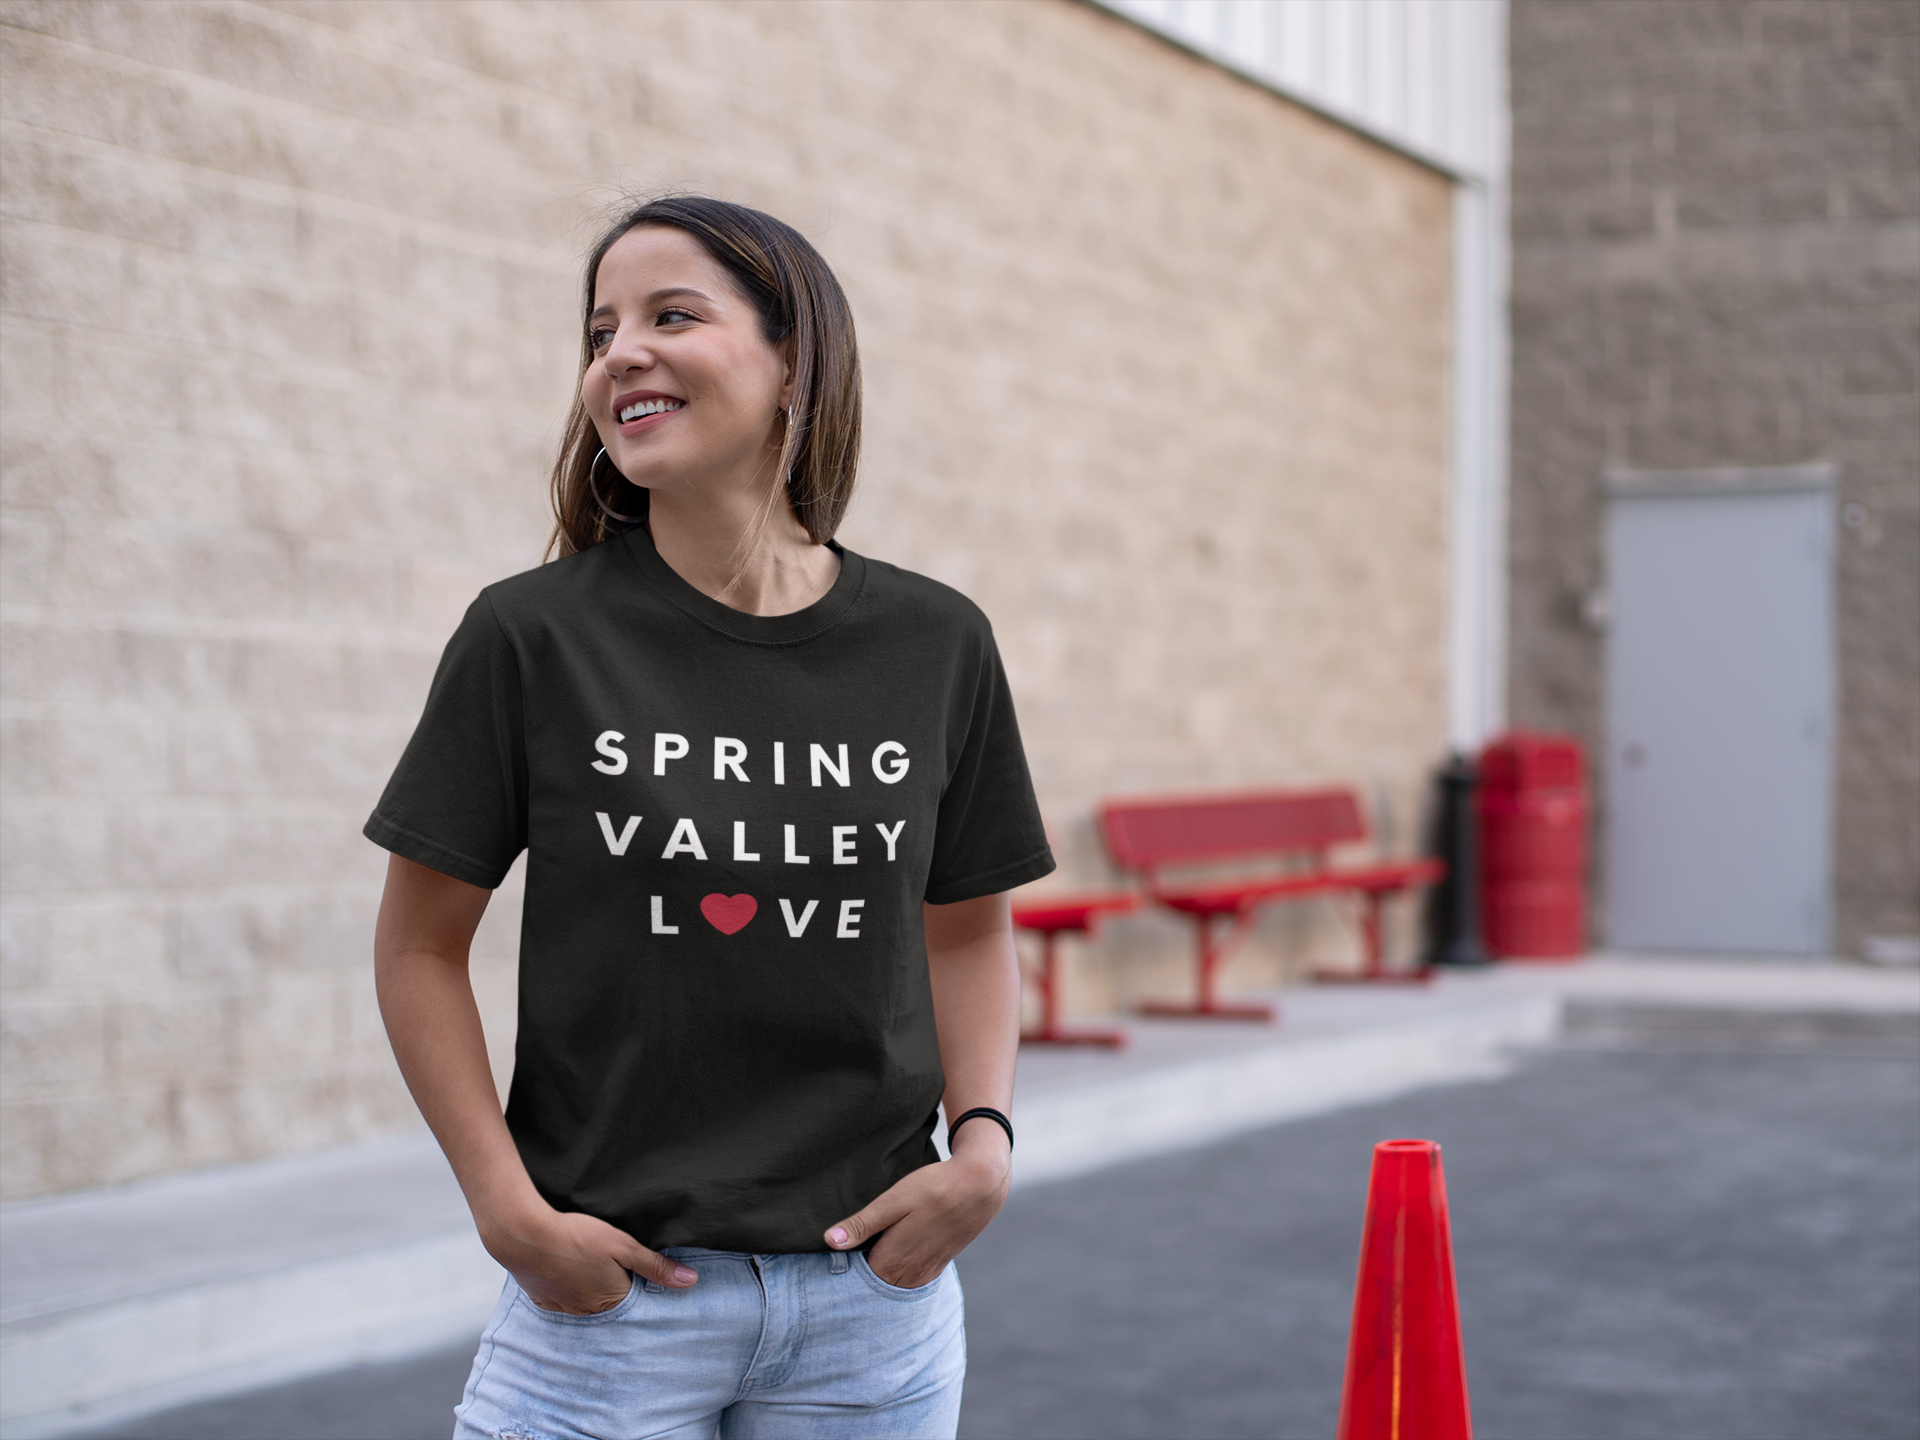 Smiling woman wearing a black Spring Valley Love t-shirt in a parking lot.